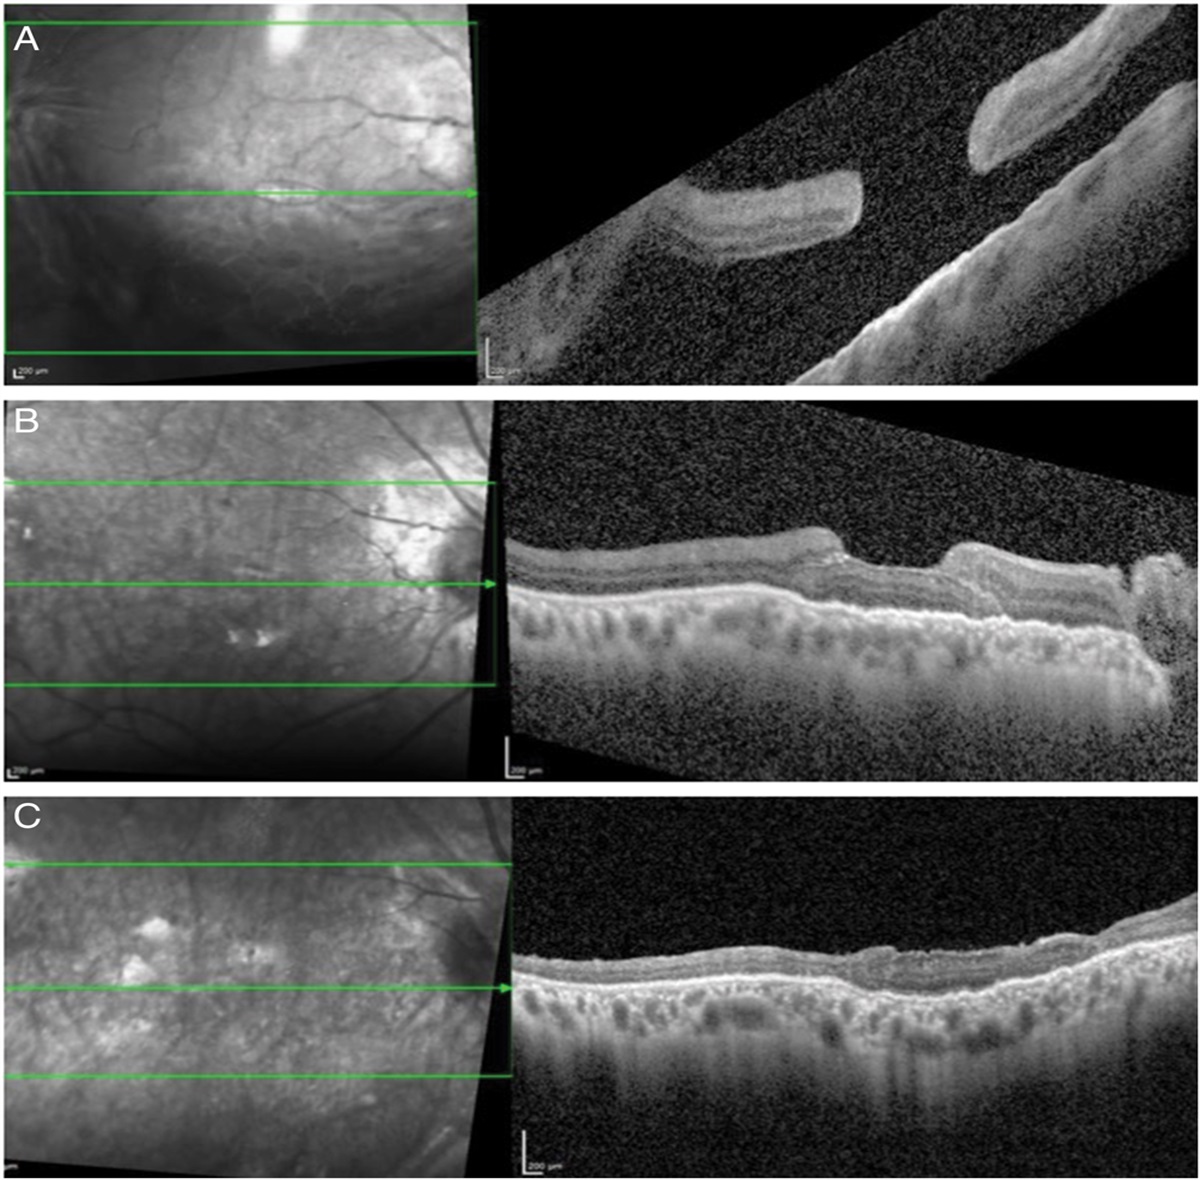 Management of Retinal Detachment With a Coexistent Macular Hole: Submacular Placement of Retinal Autograft Through a Macular Hole